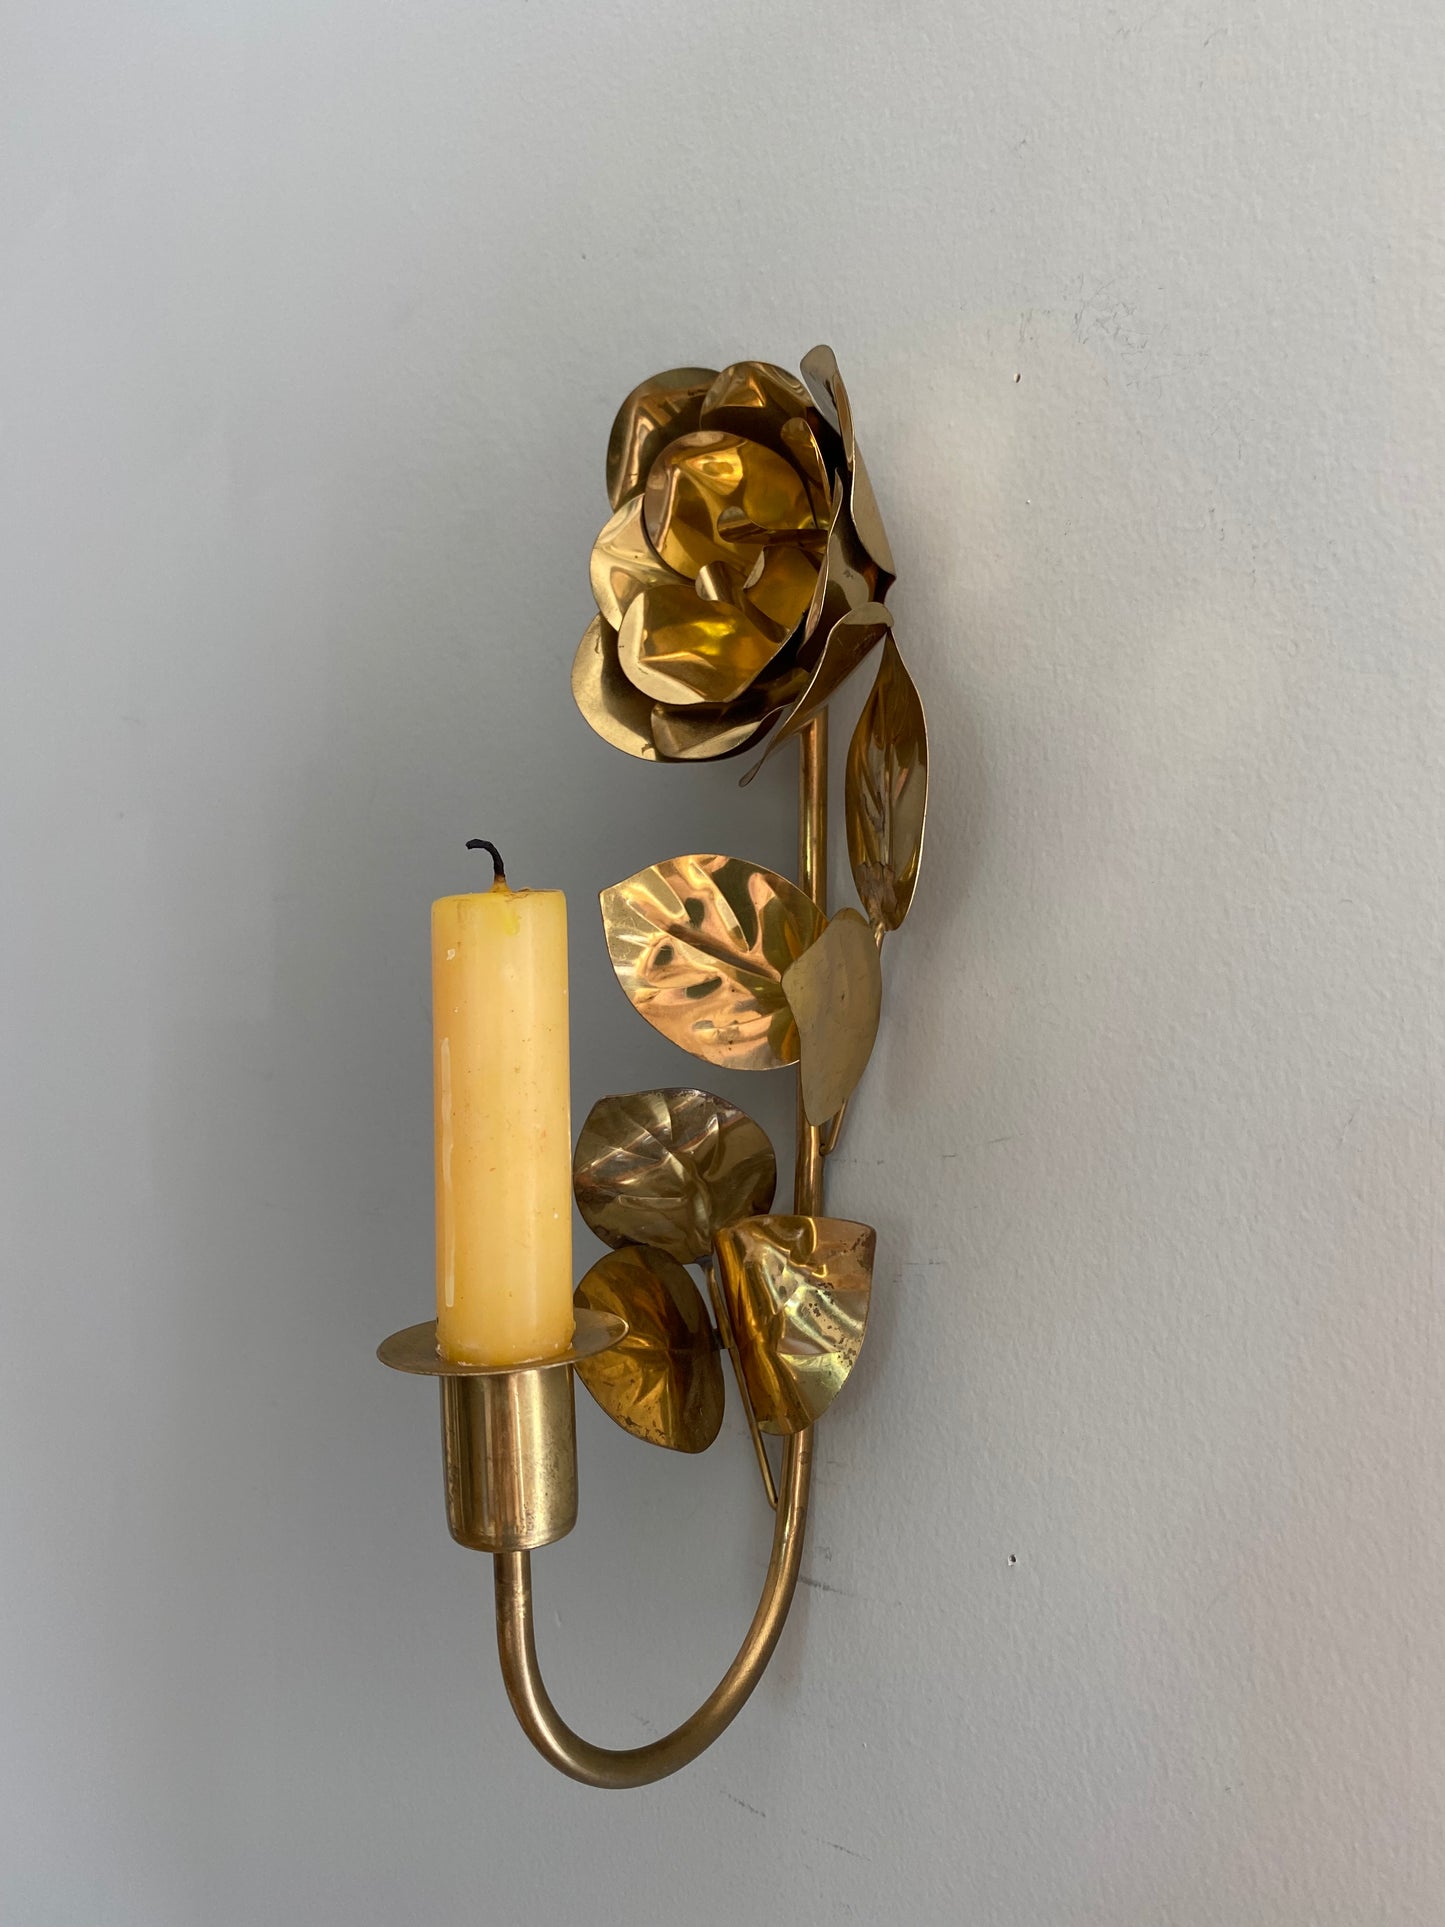 Brass wall candle holders